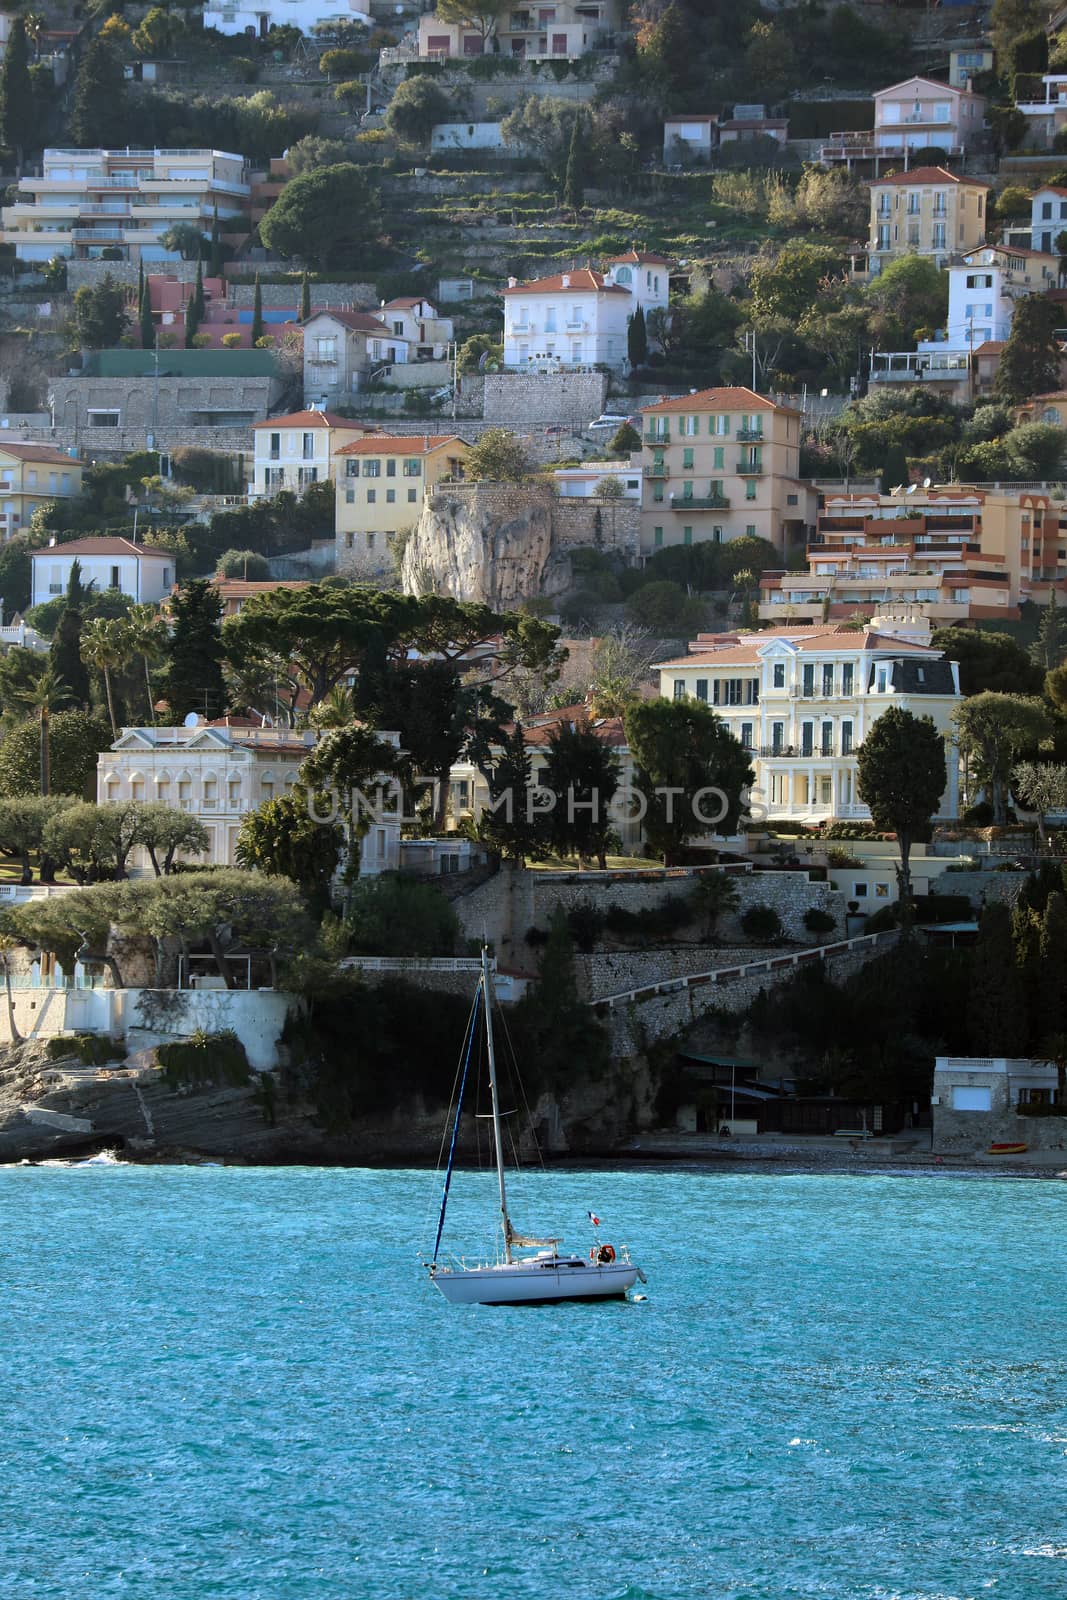 Sailboat With The Beach (La Plage du Buse) And The Luxury Houses of The City of Roquebrune-Cap-Martin in The Background, French Riviera